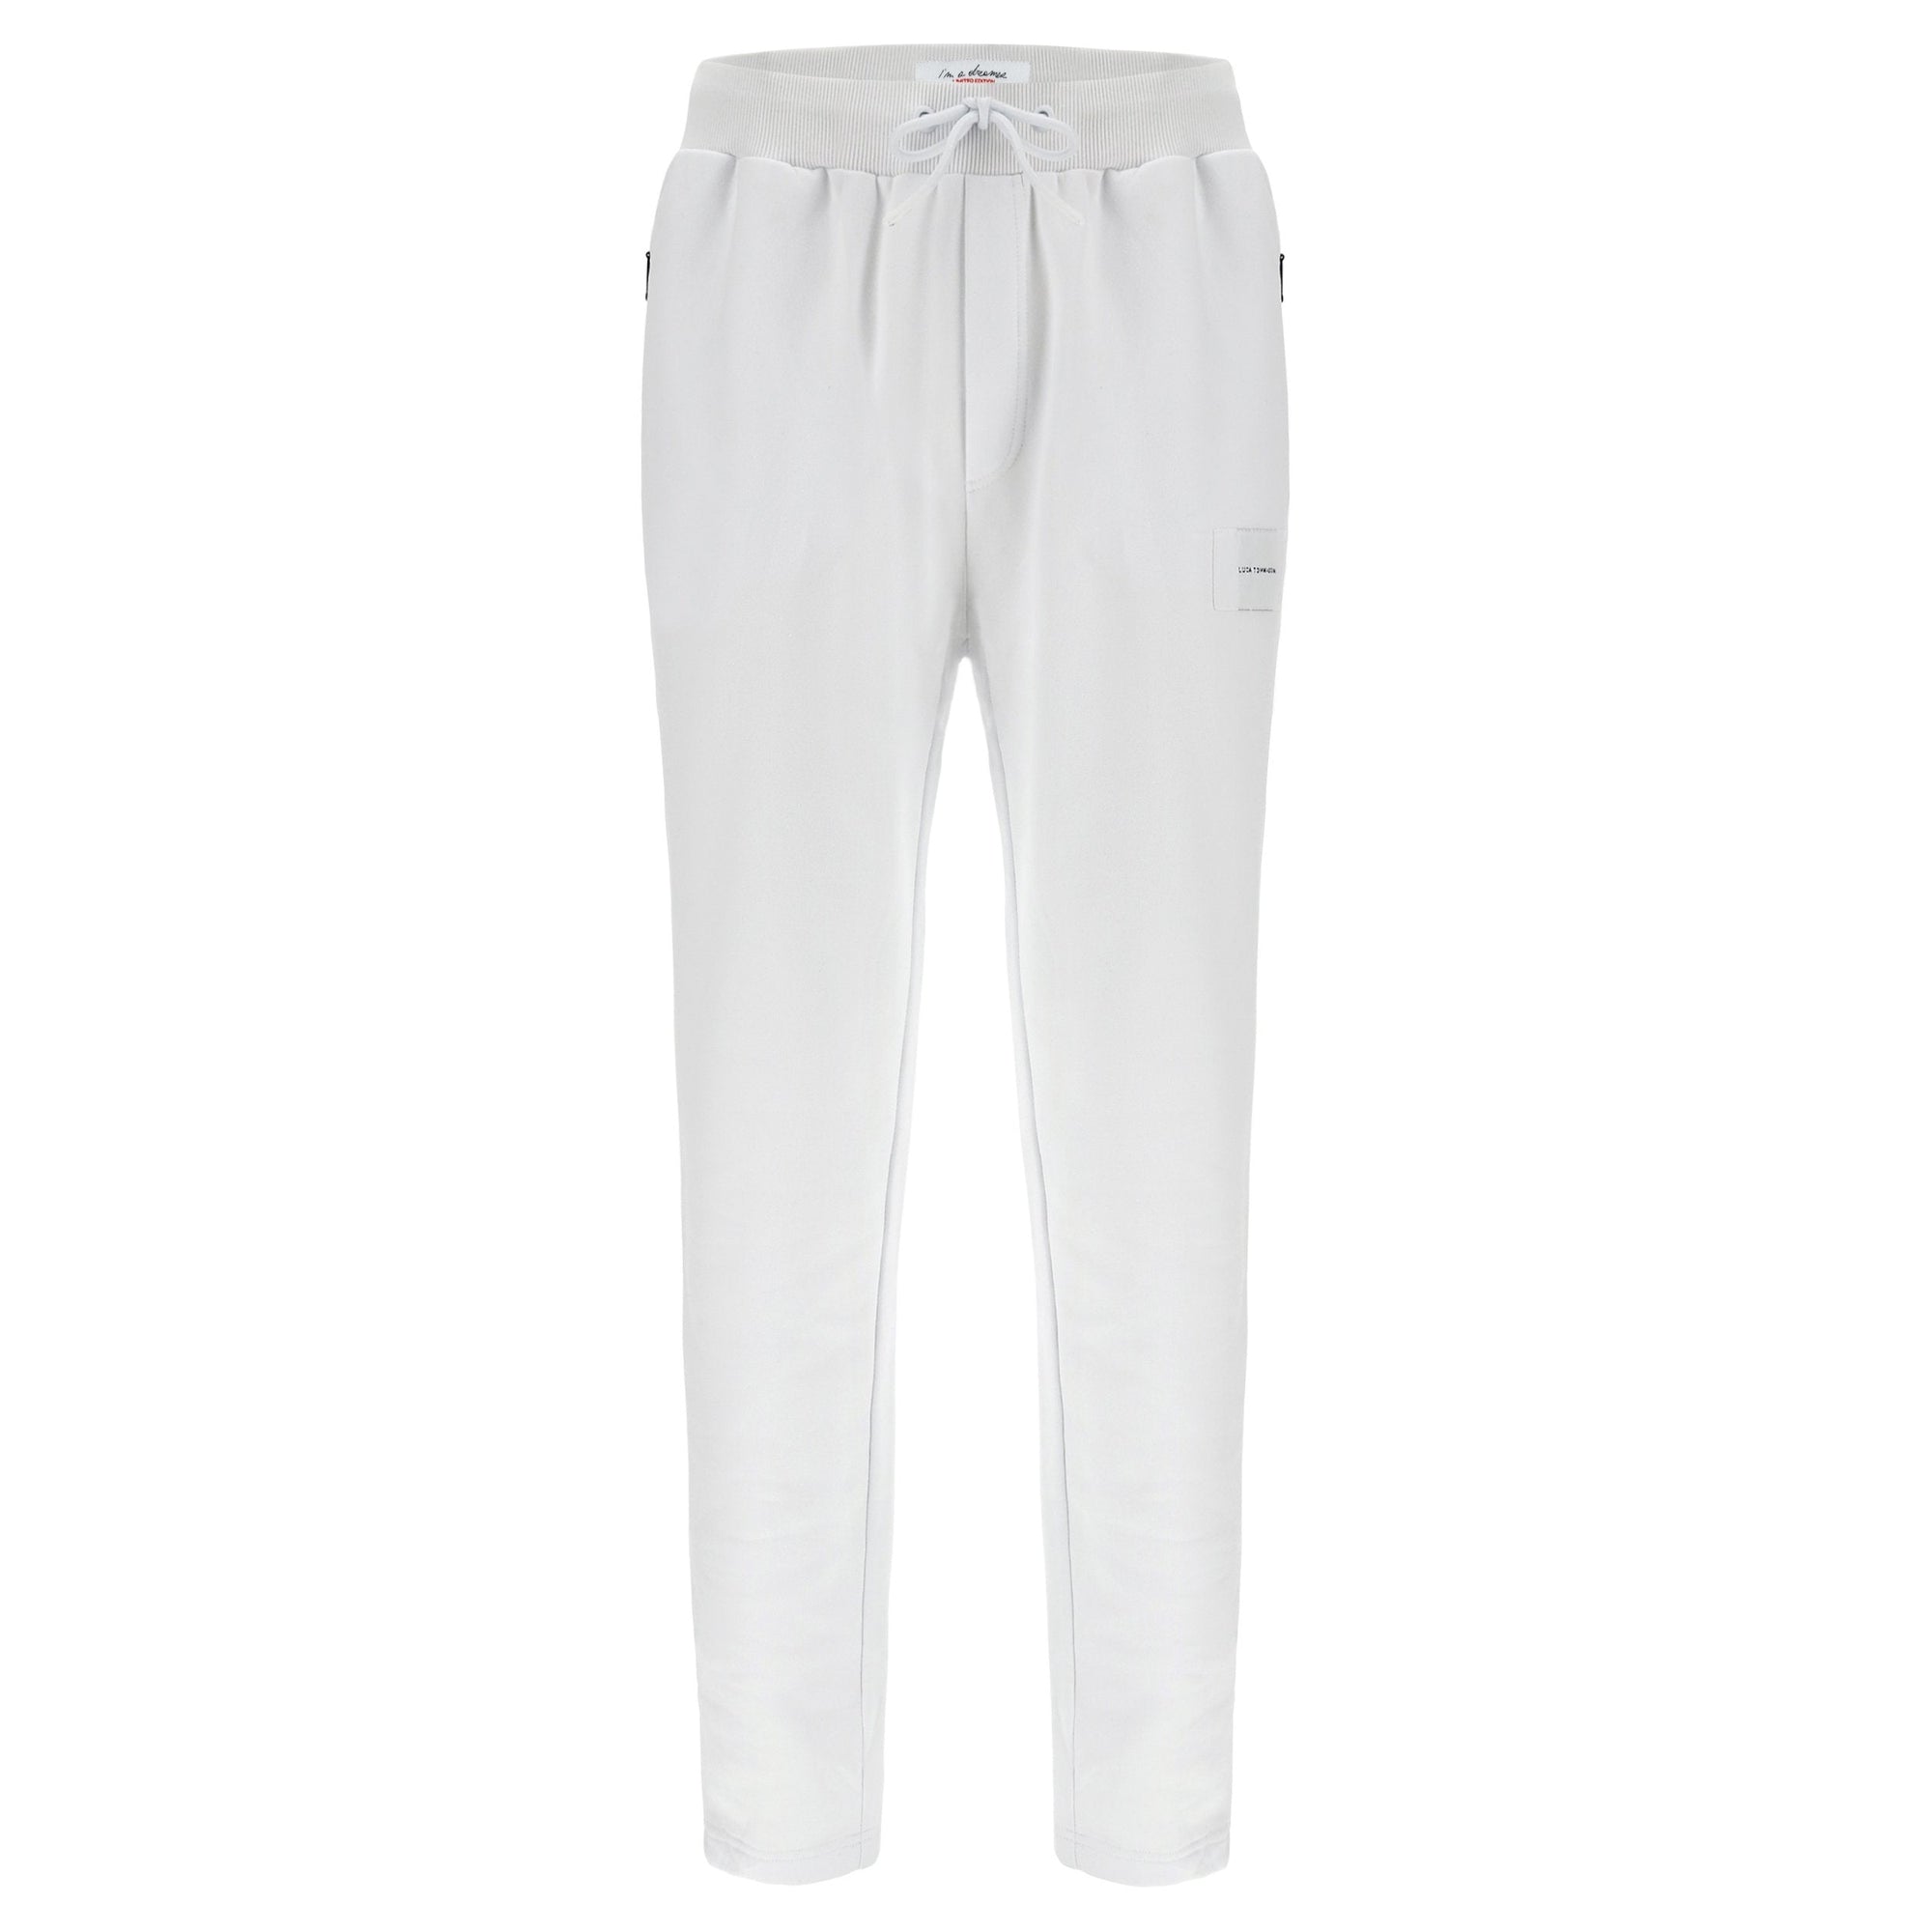 Trousers unisex Dreamer - White - A Choreography by Luca Tommassini 1